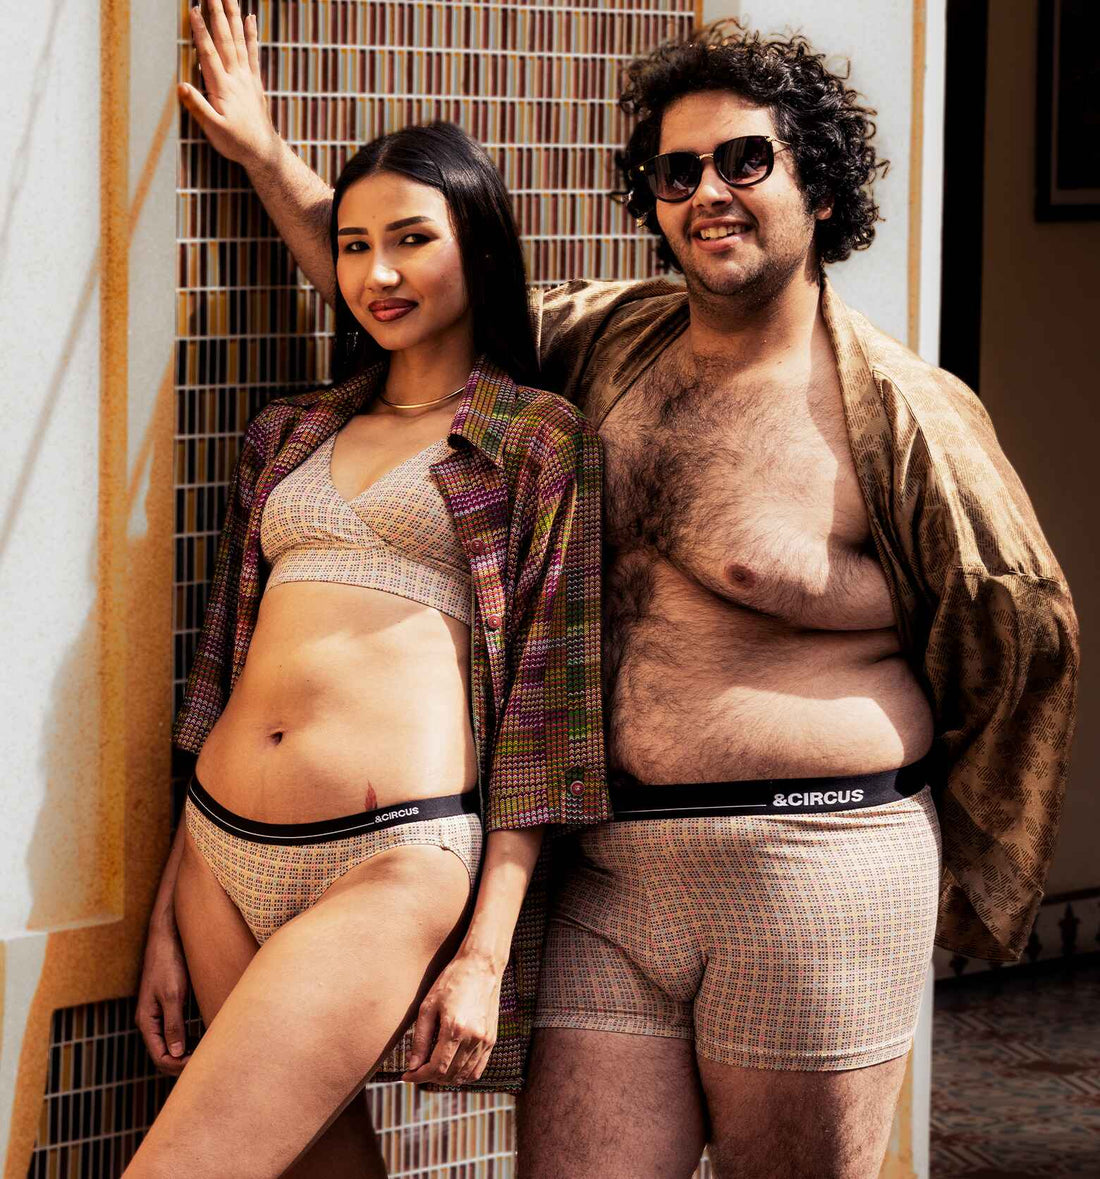 Buy Matching Underwear Sets for Couples Online- Tailor and Circus